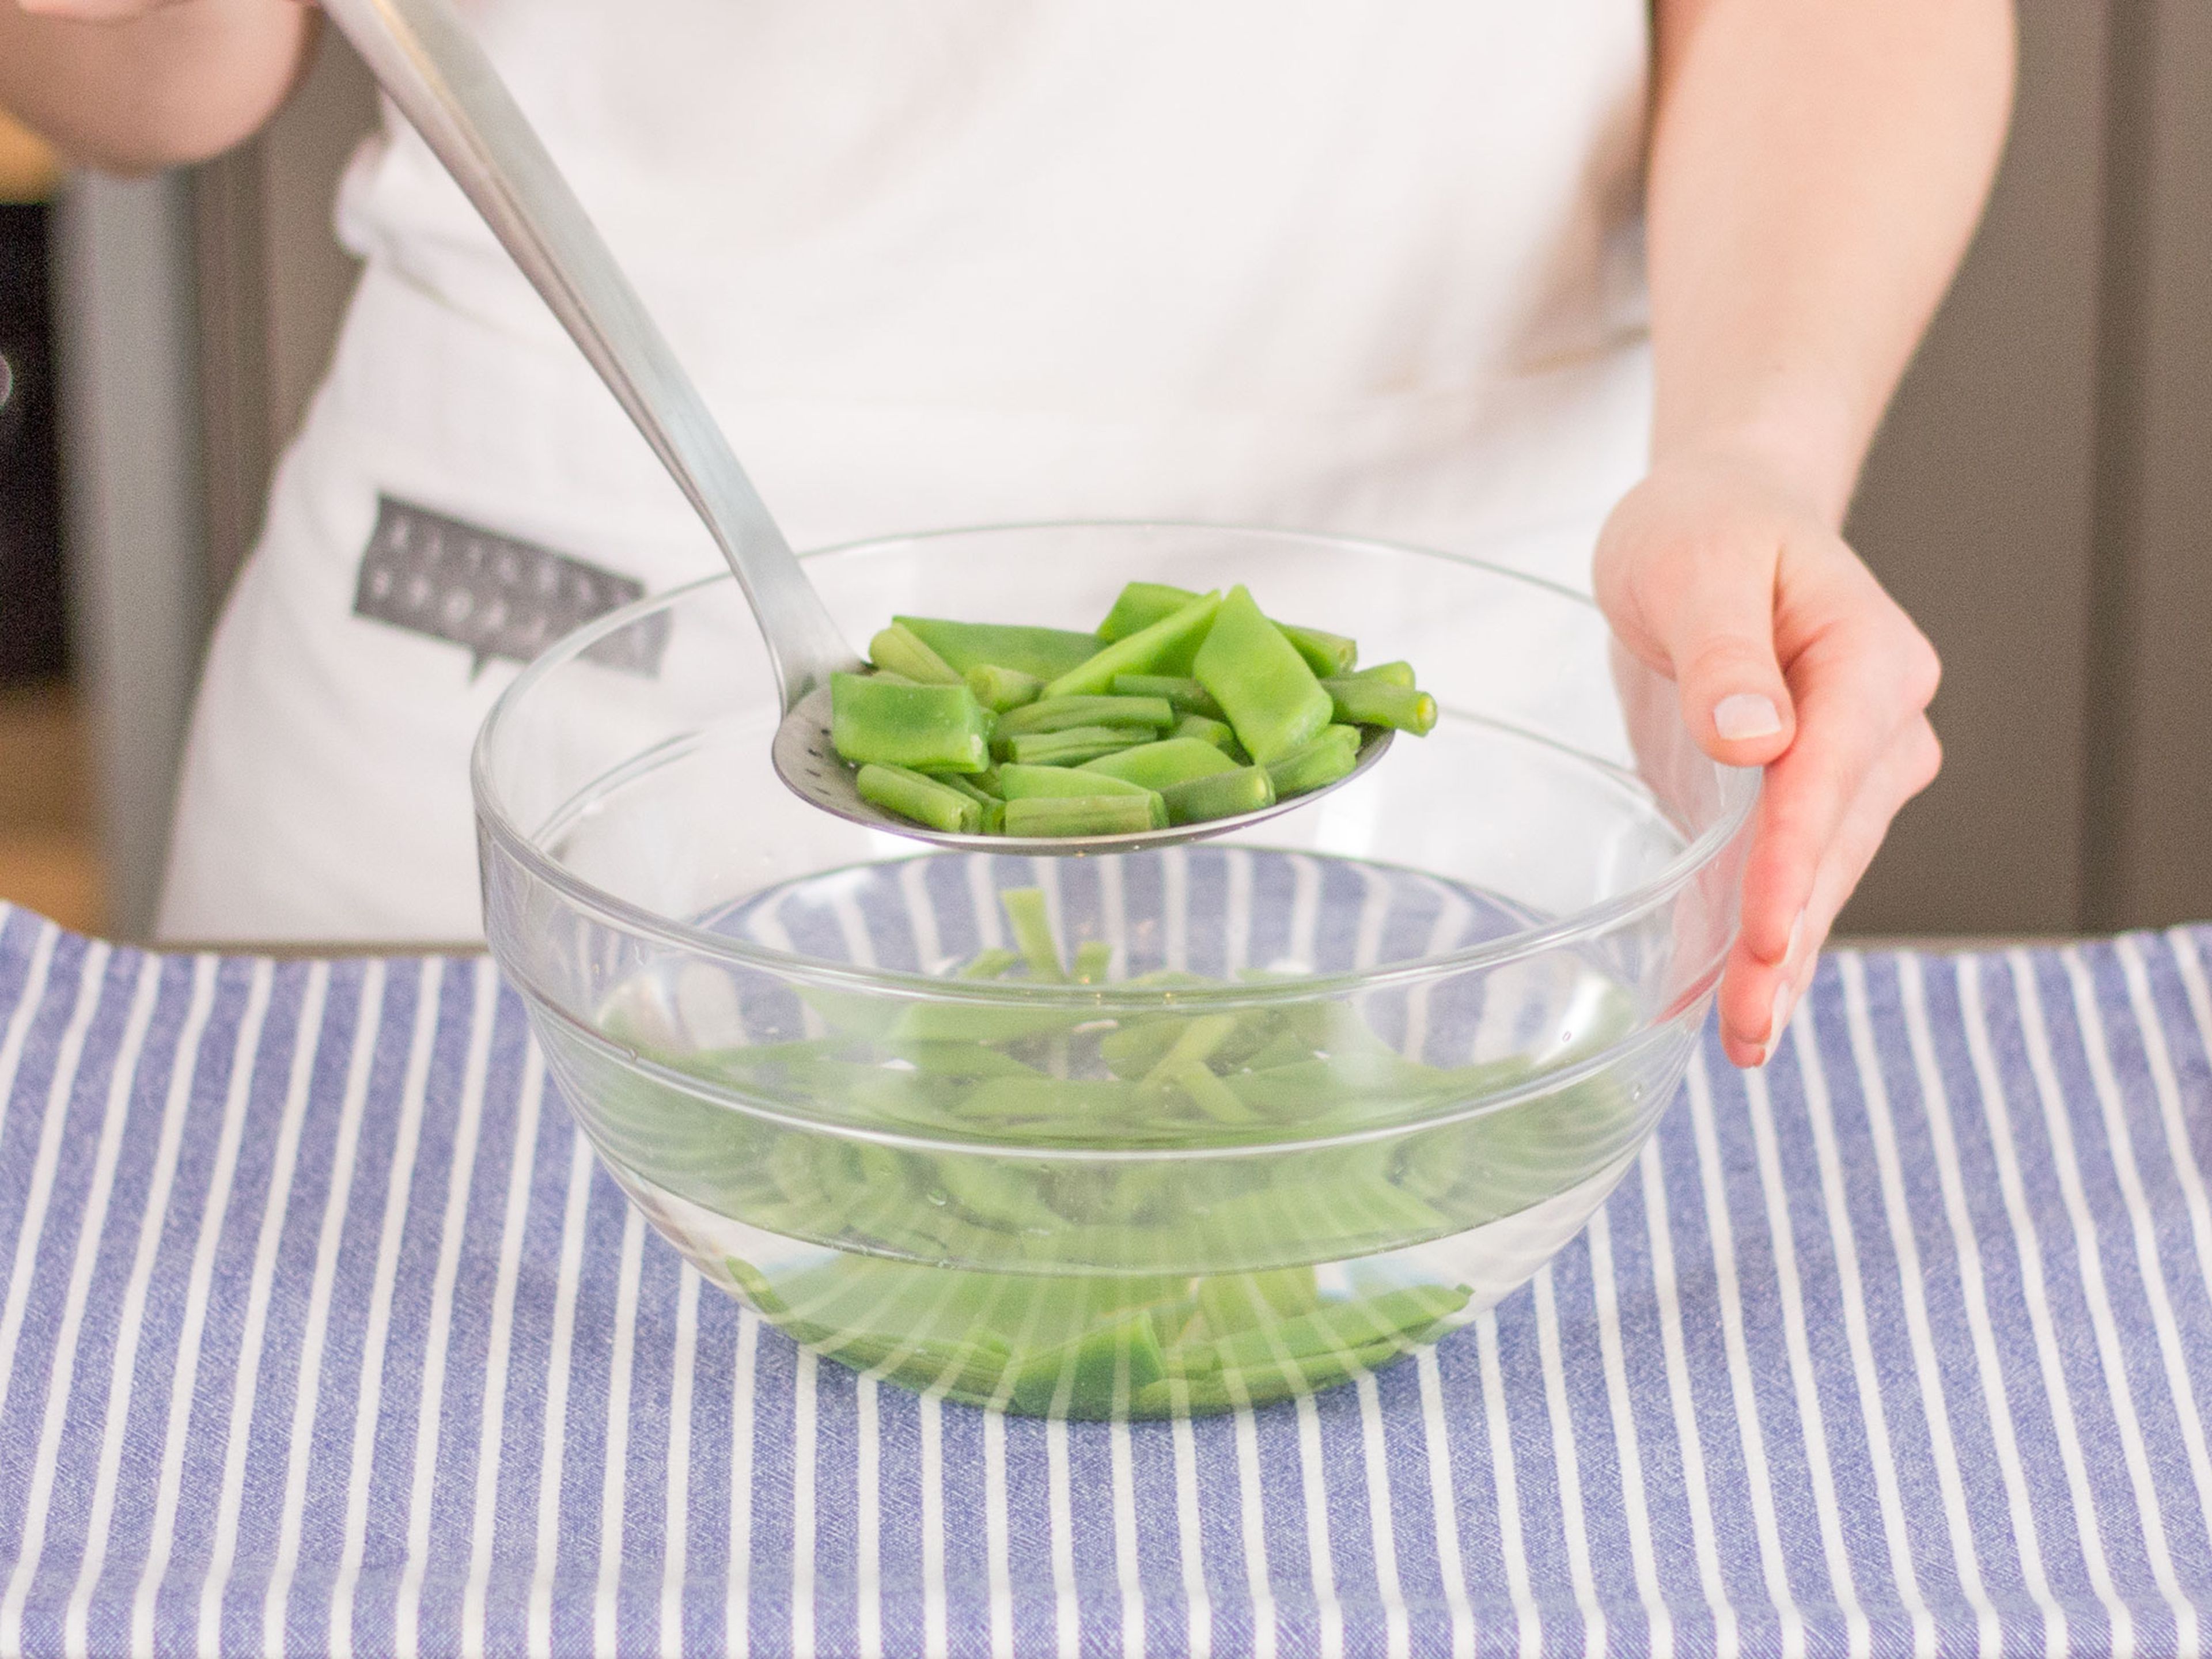 In a large saucepan, blanch green beans and snap peas in salted boiling water for approx. 8 – 10 min. Transfer to an ice bath for approx. 20 sec. Drain and set aside.